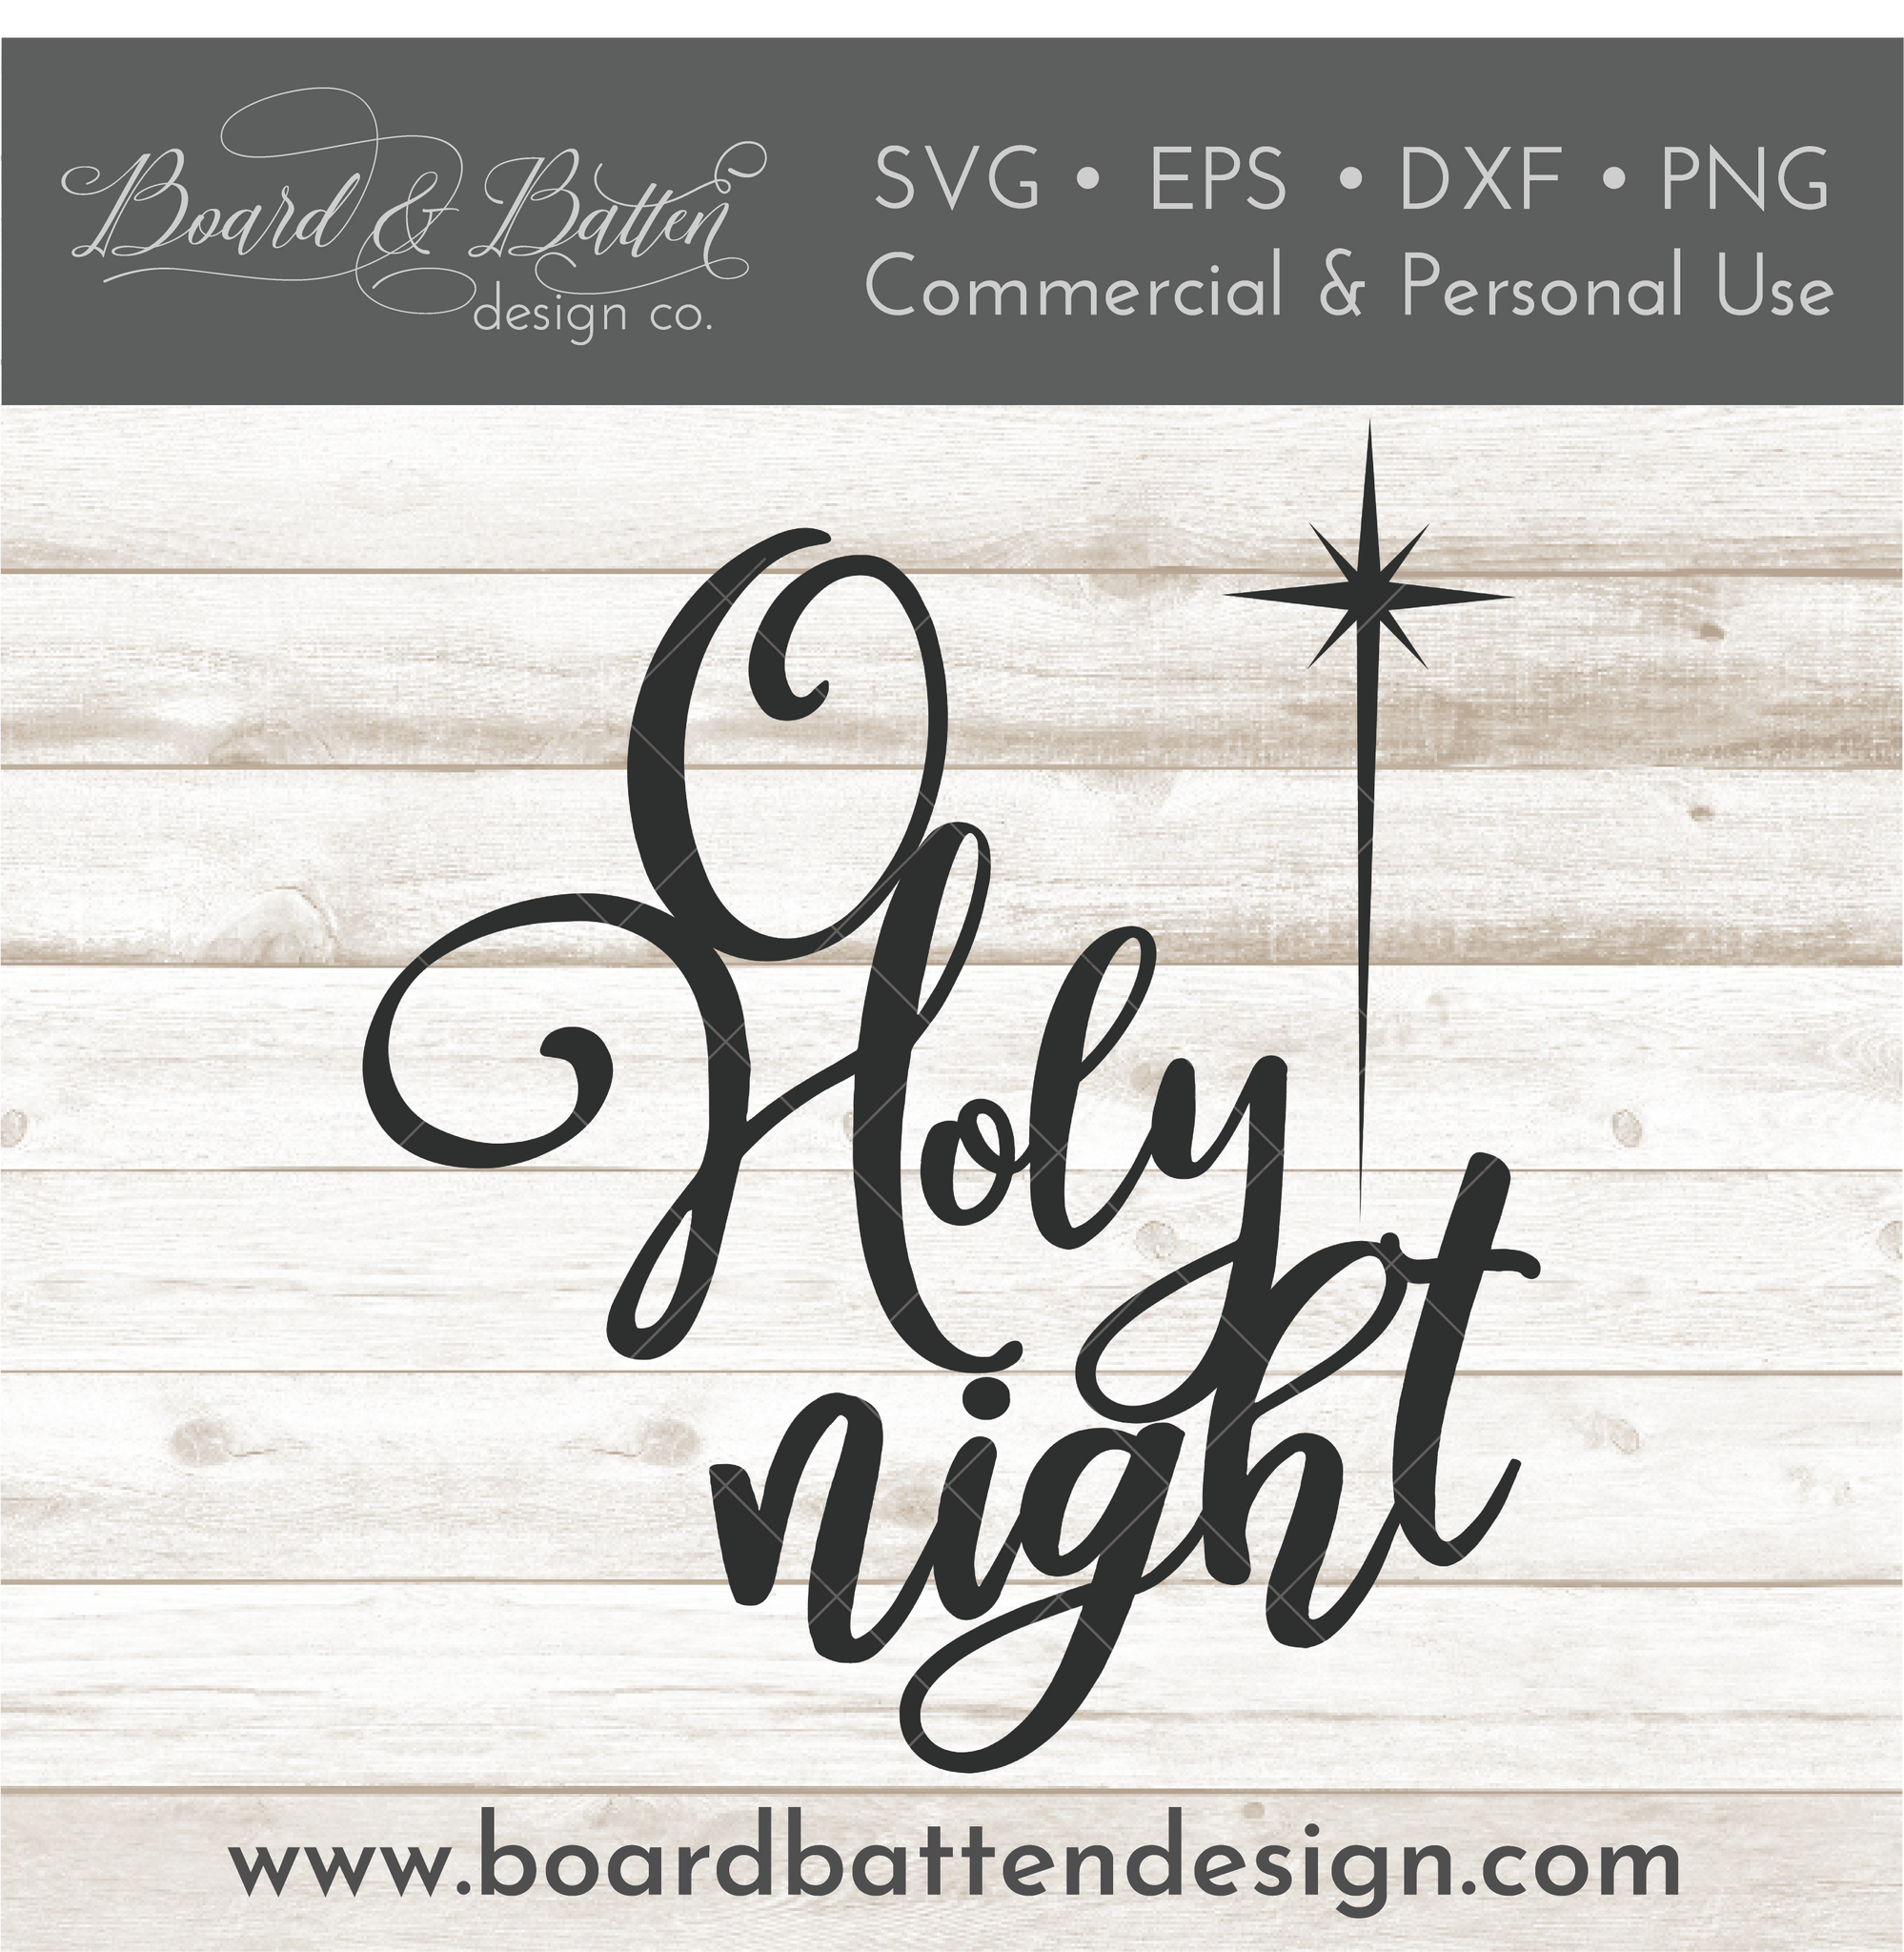 Oh Holy Night SVG / Nativity Scene SVG / Cut File / Cricut / Commercial use  / Silhouette / DXF file / Christmas decoration